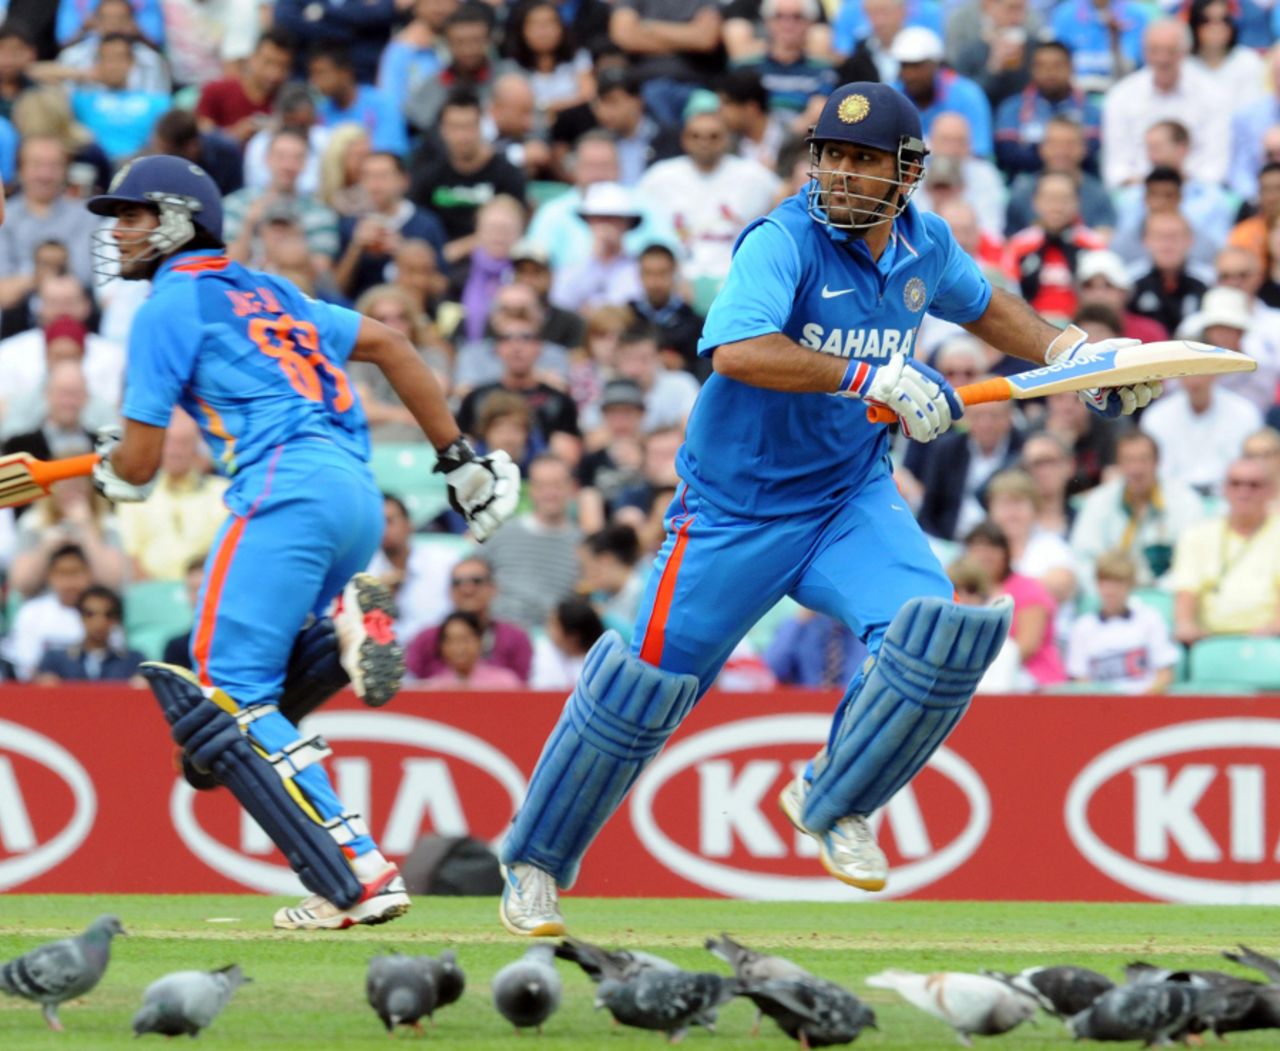 MS Dhoni and Ravindra Jadeja helped to repair India's innings, England v India, 3rd ODI, The Oval, September 9 2011